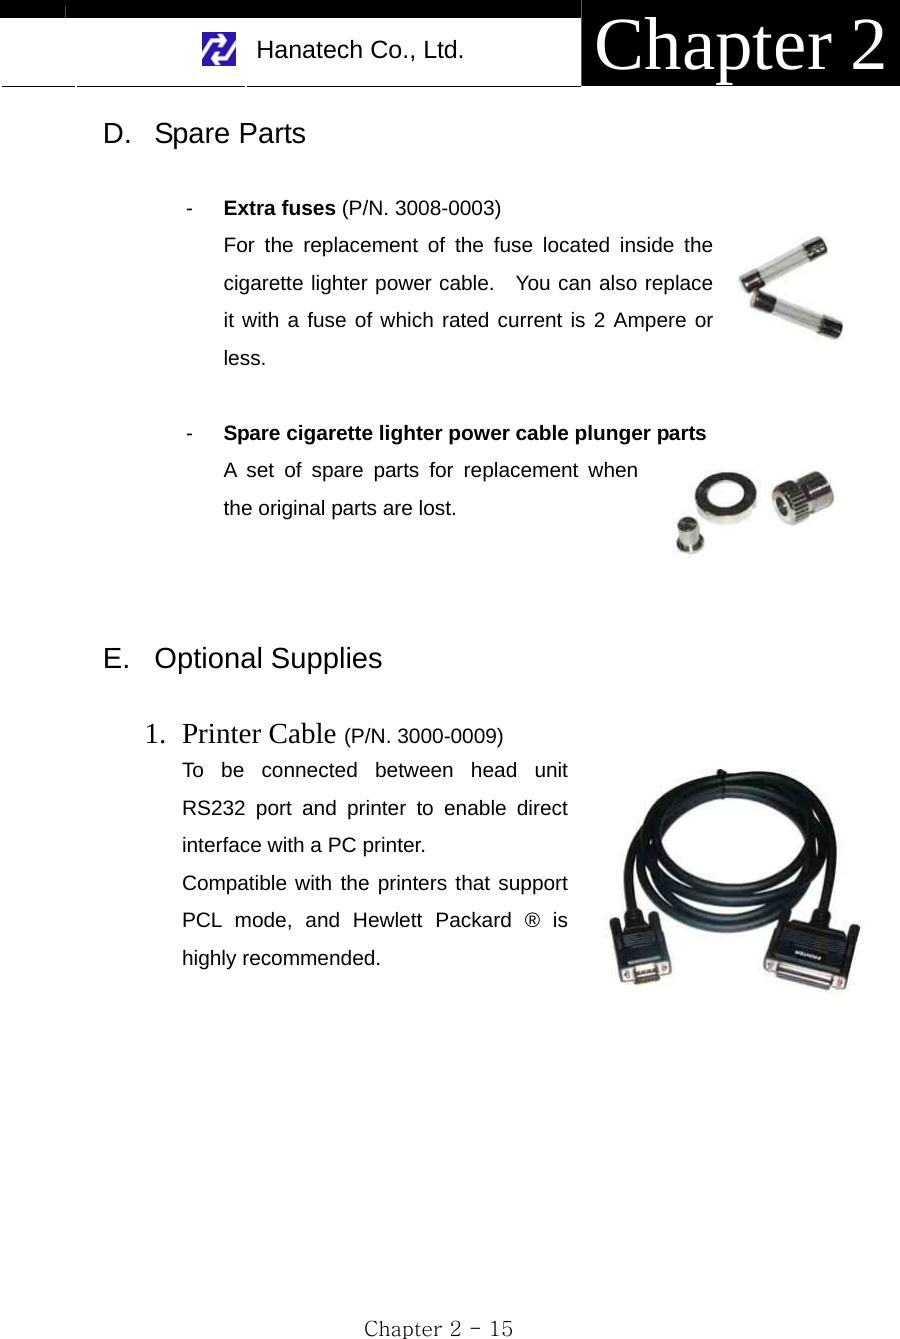     Hanatech Co., Ltd.  Chapter 2 Chapter 2 - 15 D. Spare Parts  -  Extra fuses (P/N. 3008-0003) For the replacement of the fuse located inside the cigarette lighter power cable.  You can also replace it with a fuse of which rated current is 2 Ampere or less.  -  Spare cigarette lighter power cable plunger parts A set of spare parts for replacement when the original parts are lost.    E. Optional Supplies  1. Printer Cable (P/N. 3000-0009) To be connected between head unit RS232 port and printer to enable direct interface with a PC printer. Compatible with the printers that support PCL mode, and Hewlett Packard ® is highly recommended.   